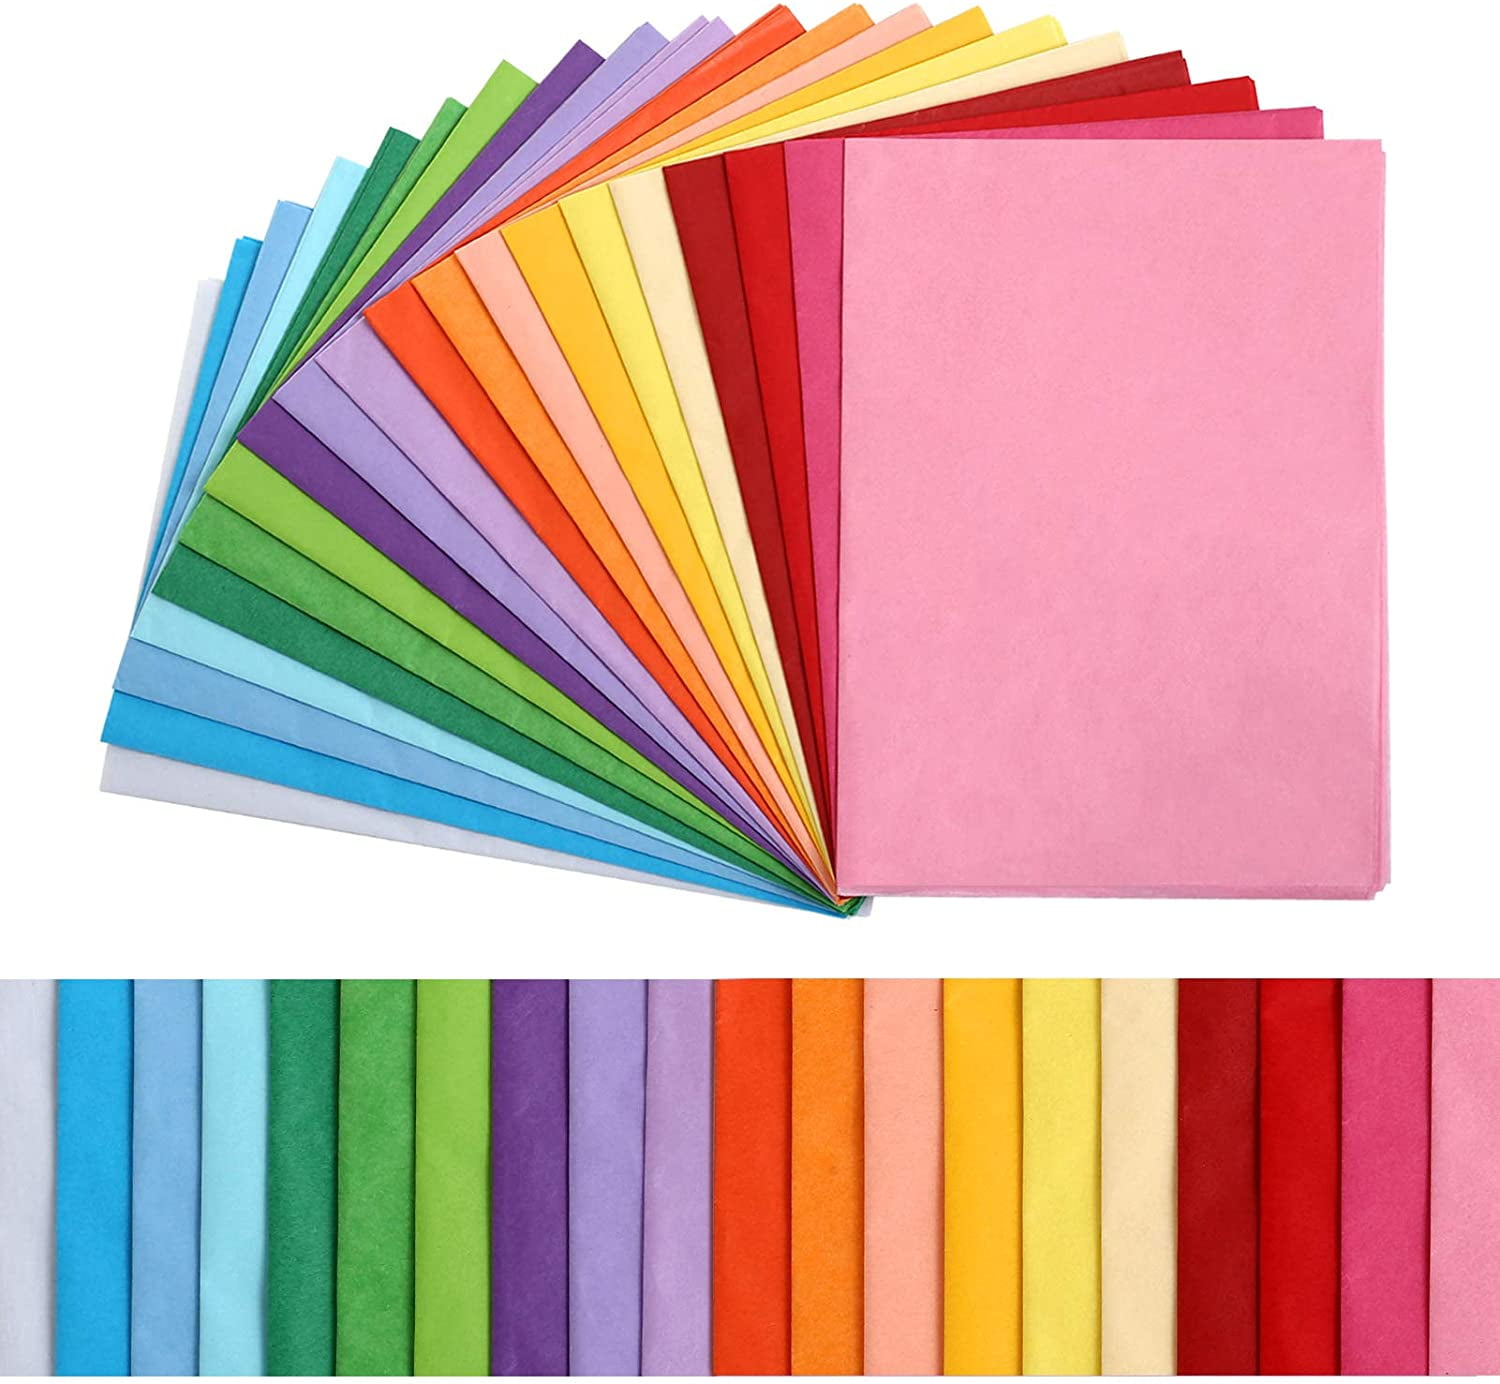 Mr. Pen- Tissue Paper For Gift Wrapping, 120 Sheets, 10 Colors, 20 x 26  Inches 